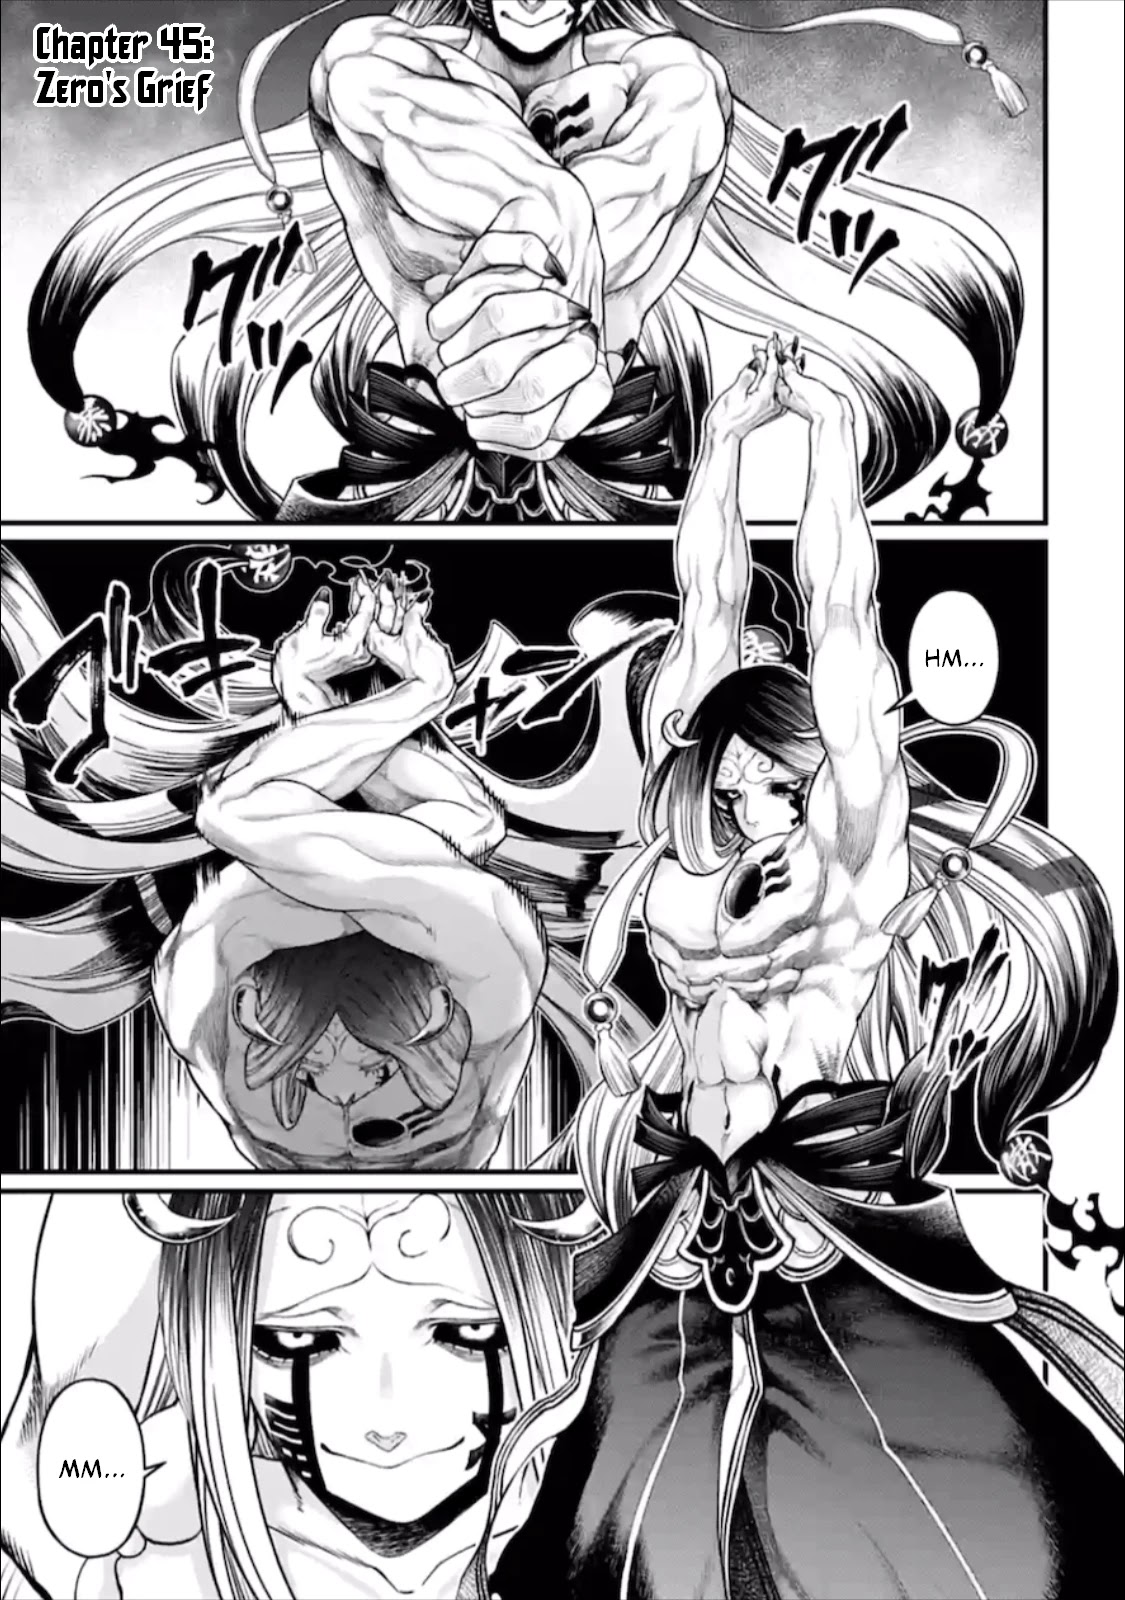 Record Of Ragnarok Chapter 45: Zero's Grief - Picture 2